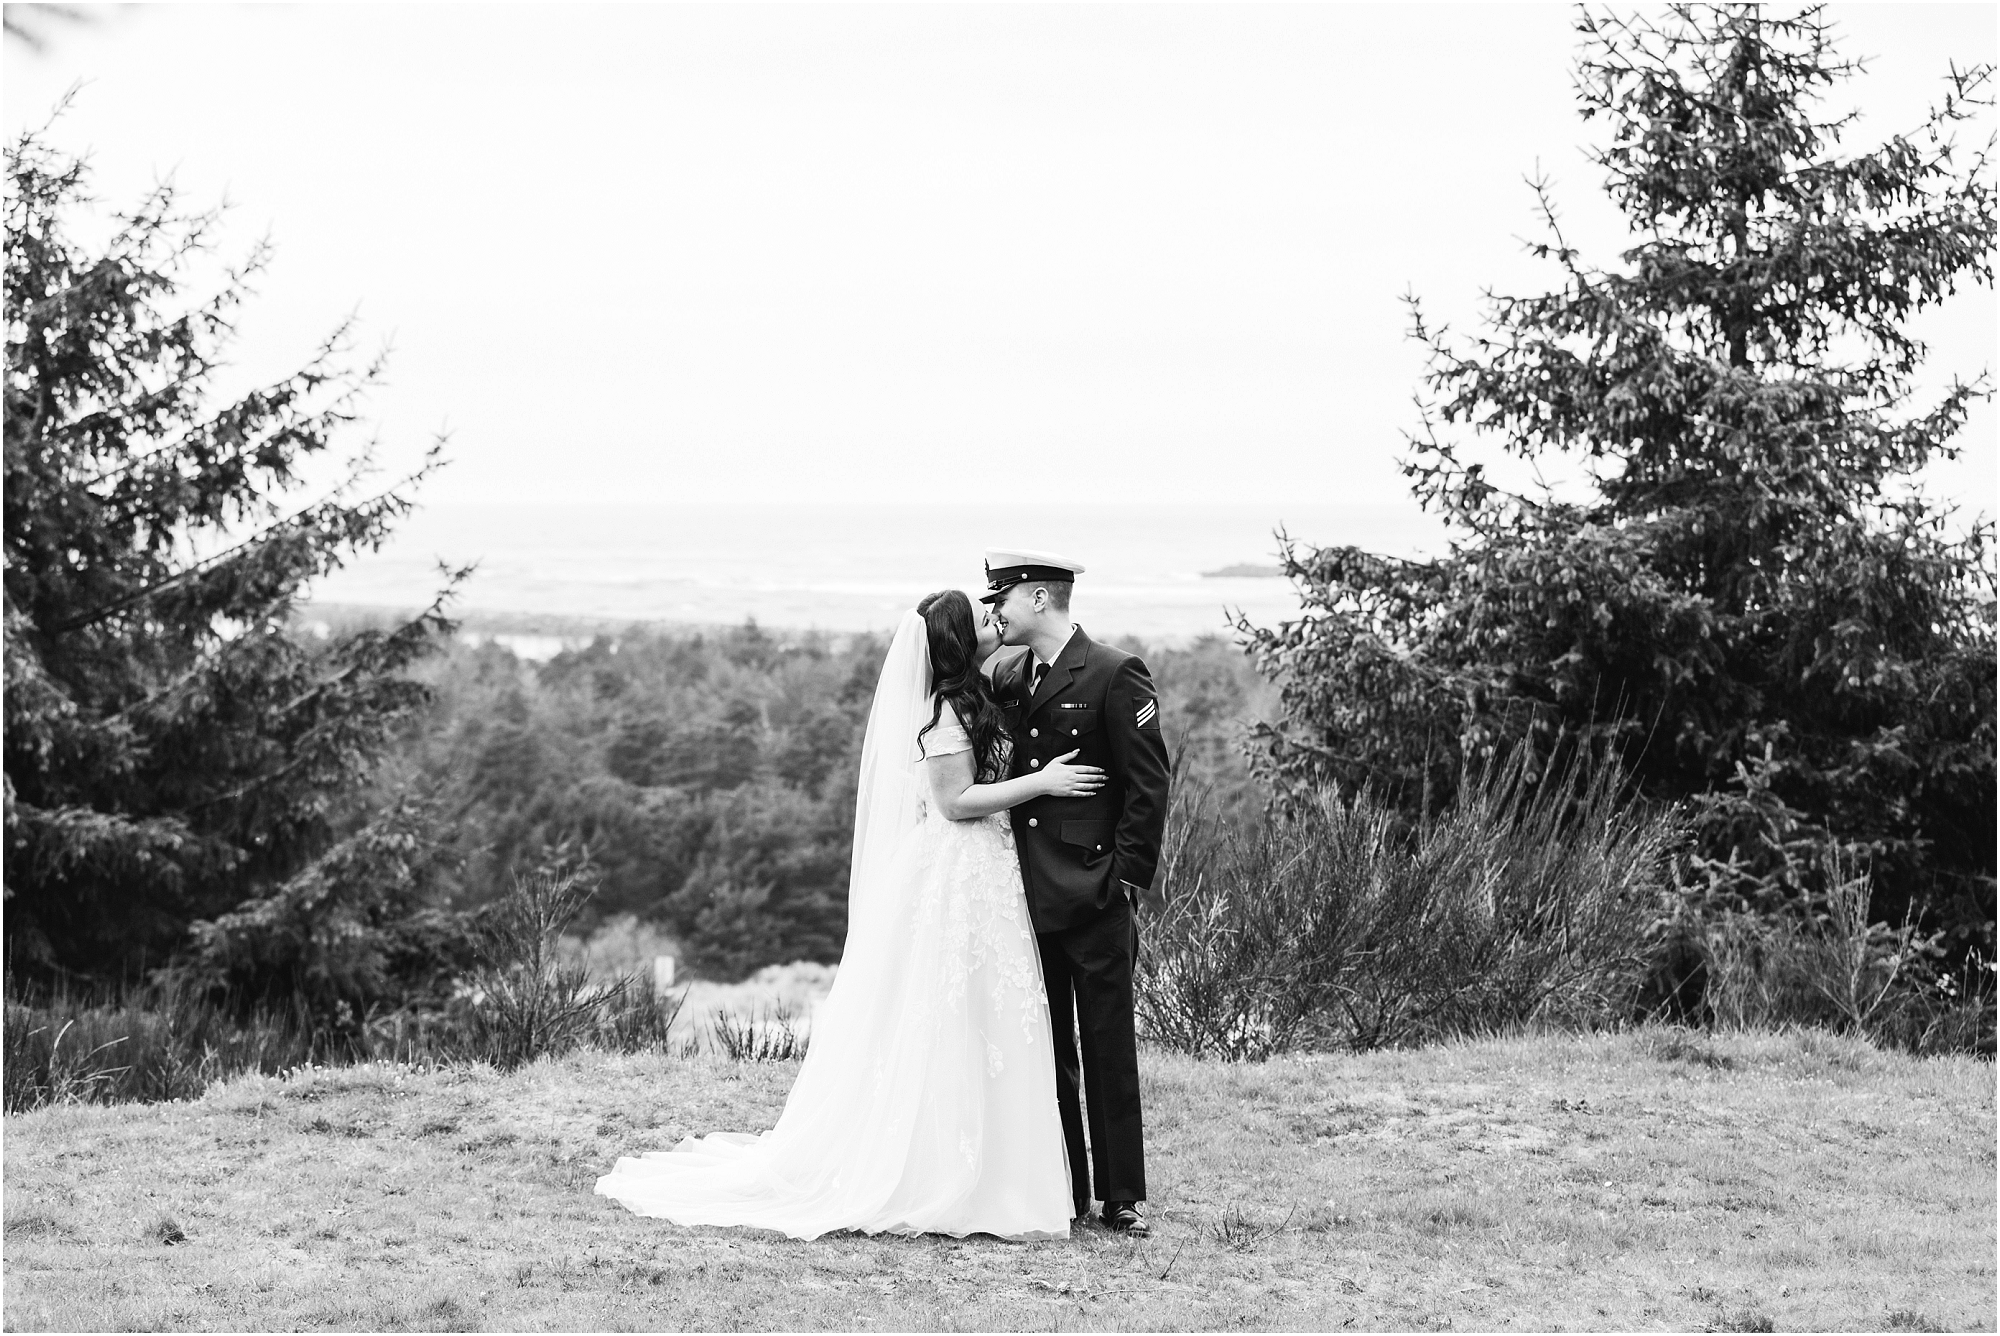 A black and white image of a groom, wearing his navy US Coast Guard uniform, and a bride wearing a blush pink off the shoulder gown, with a long white veil, pose together on a grassy overlook above the ocean for this Oregon Coast Guard Elopement in Winchester Bay. | Erica Swantek Photography